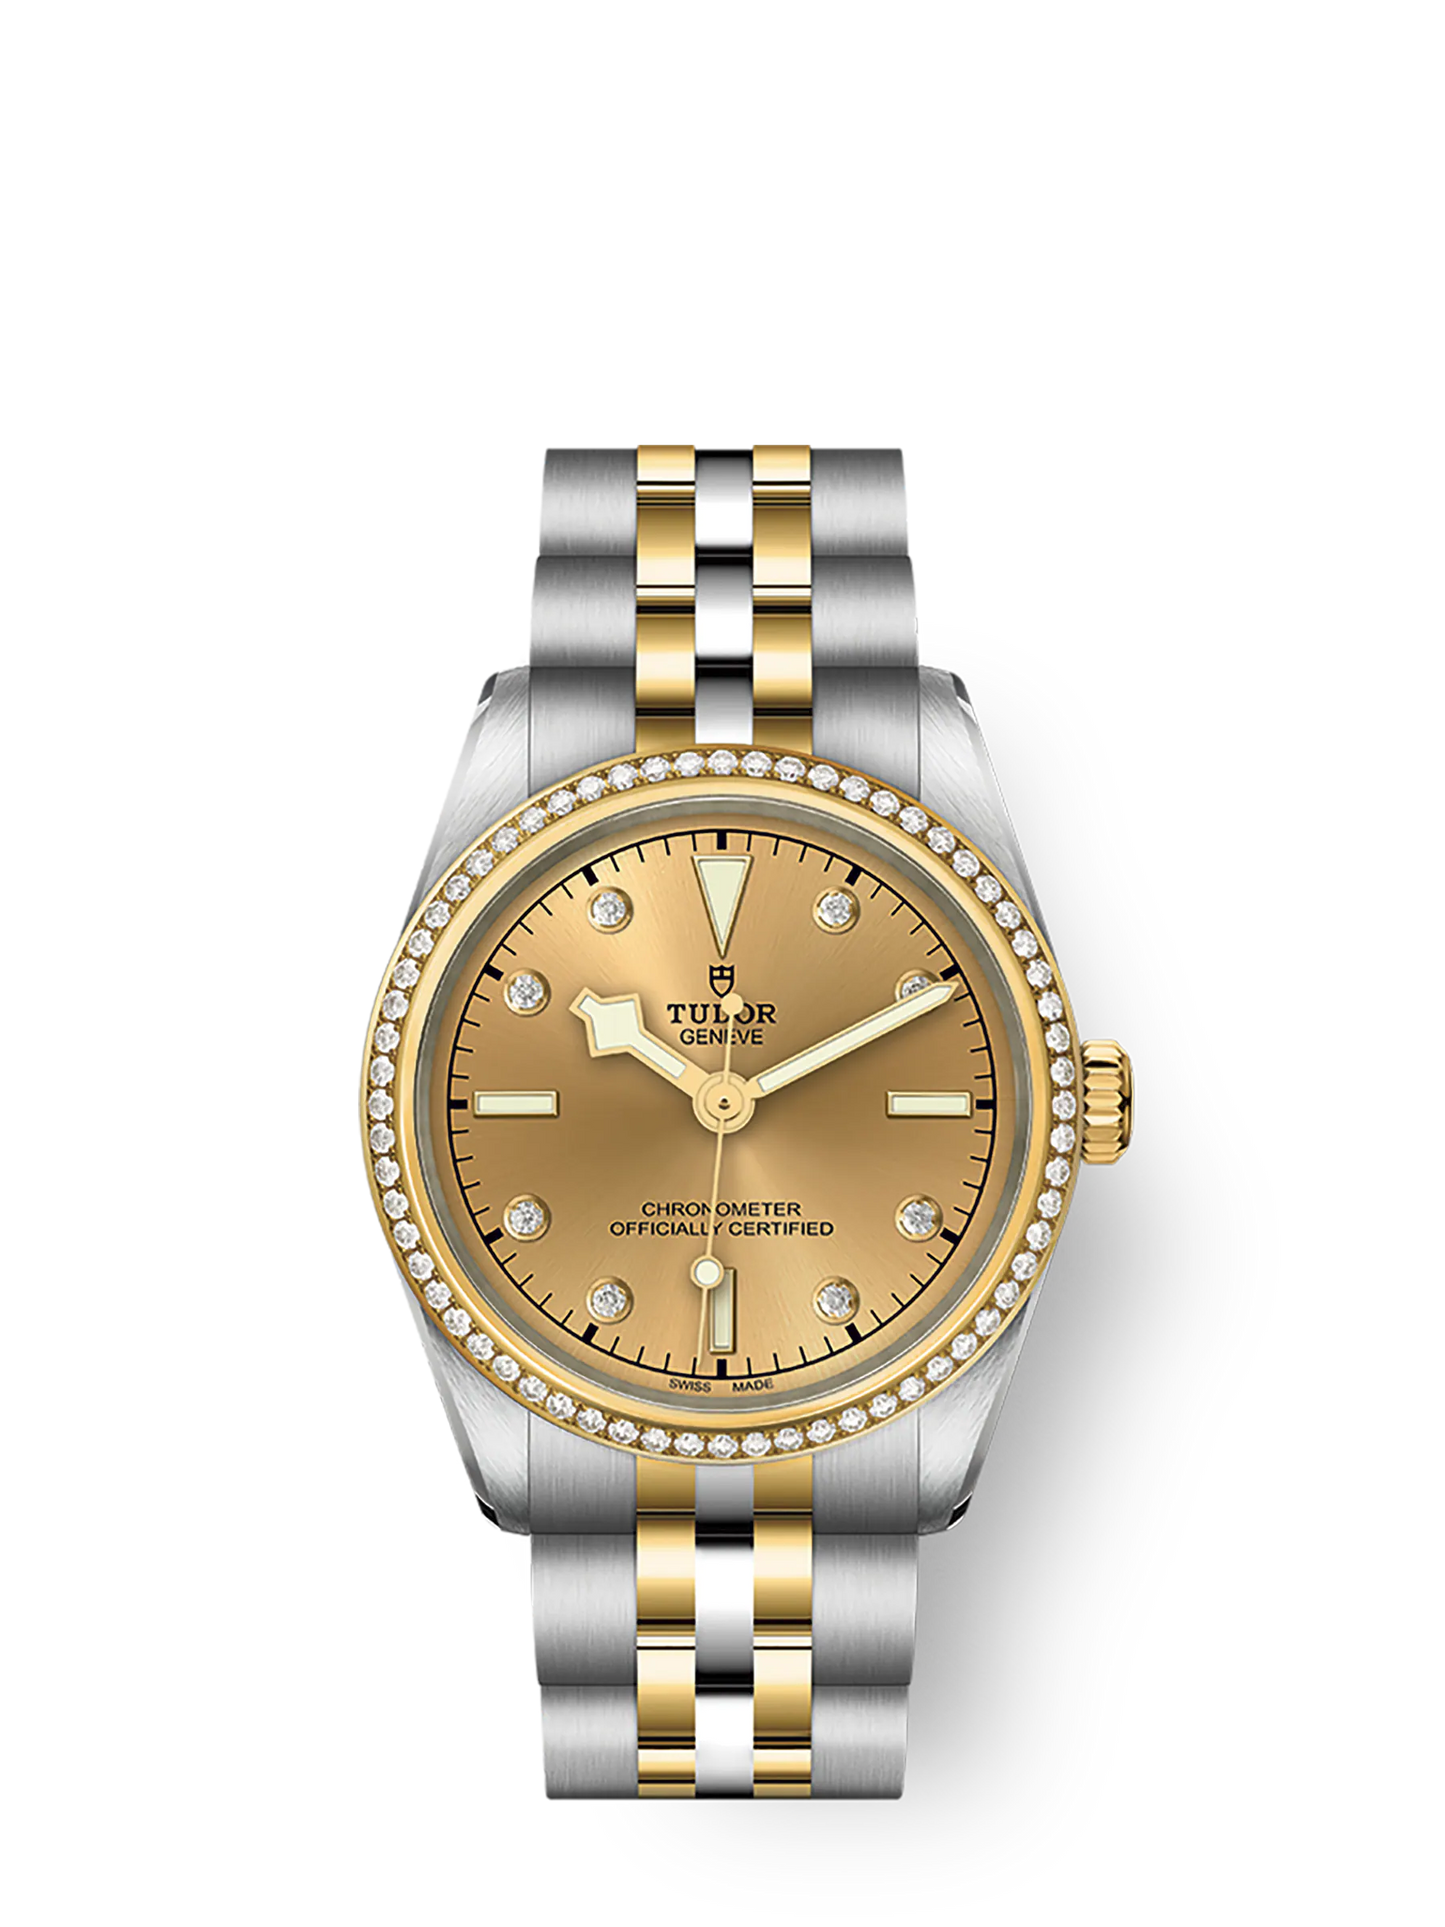 Tudor Black Bay 31 S&G, 316L Stainless Steel, 18k Yellow Gold and Diamonds, Ref# M79613-0007